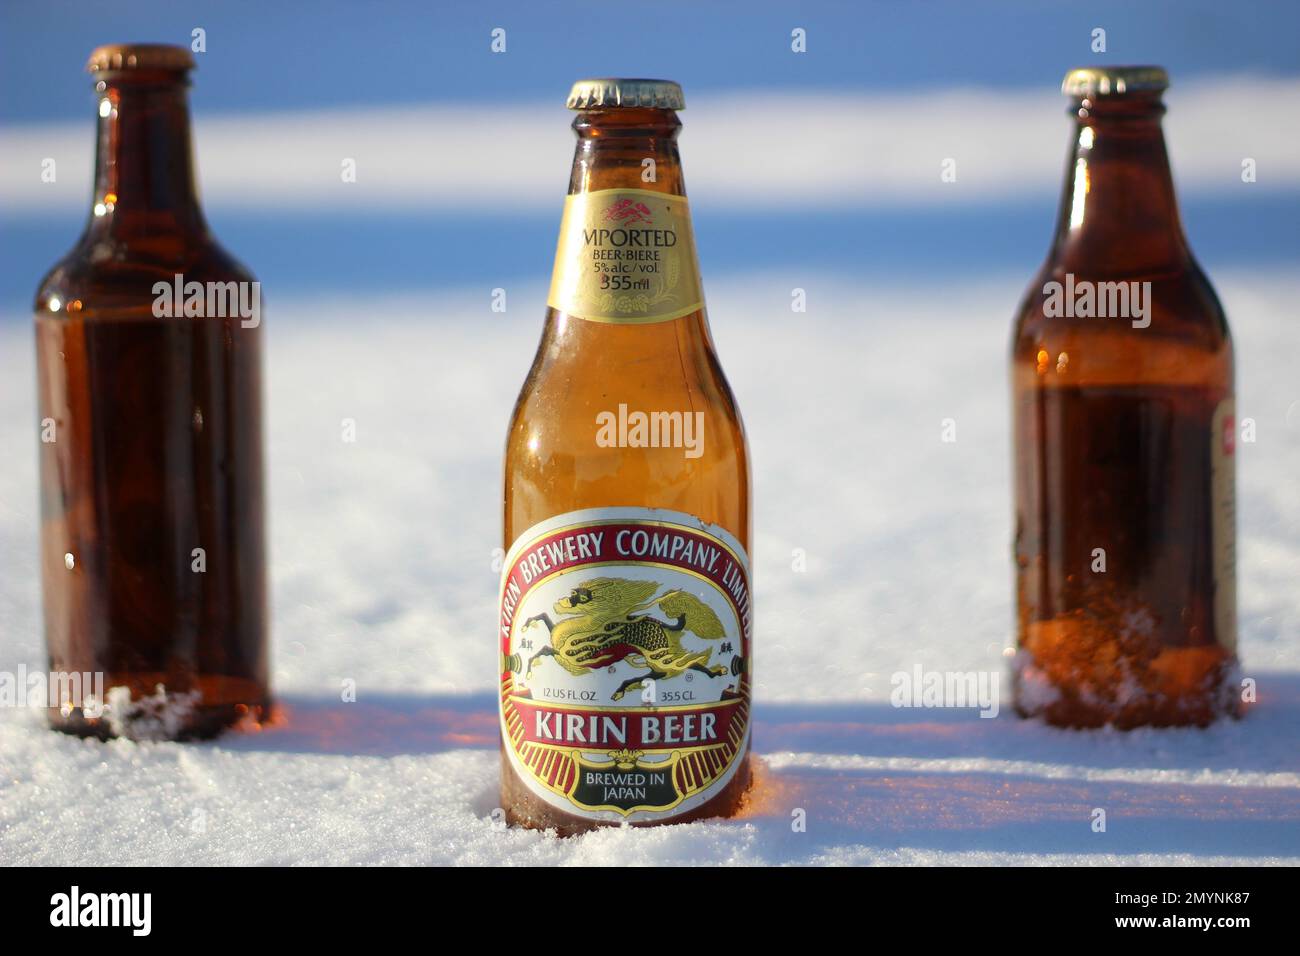 Three beer bottles in the snow, one old Japanese beer bottle in front. Stock Photo